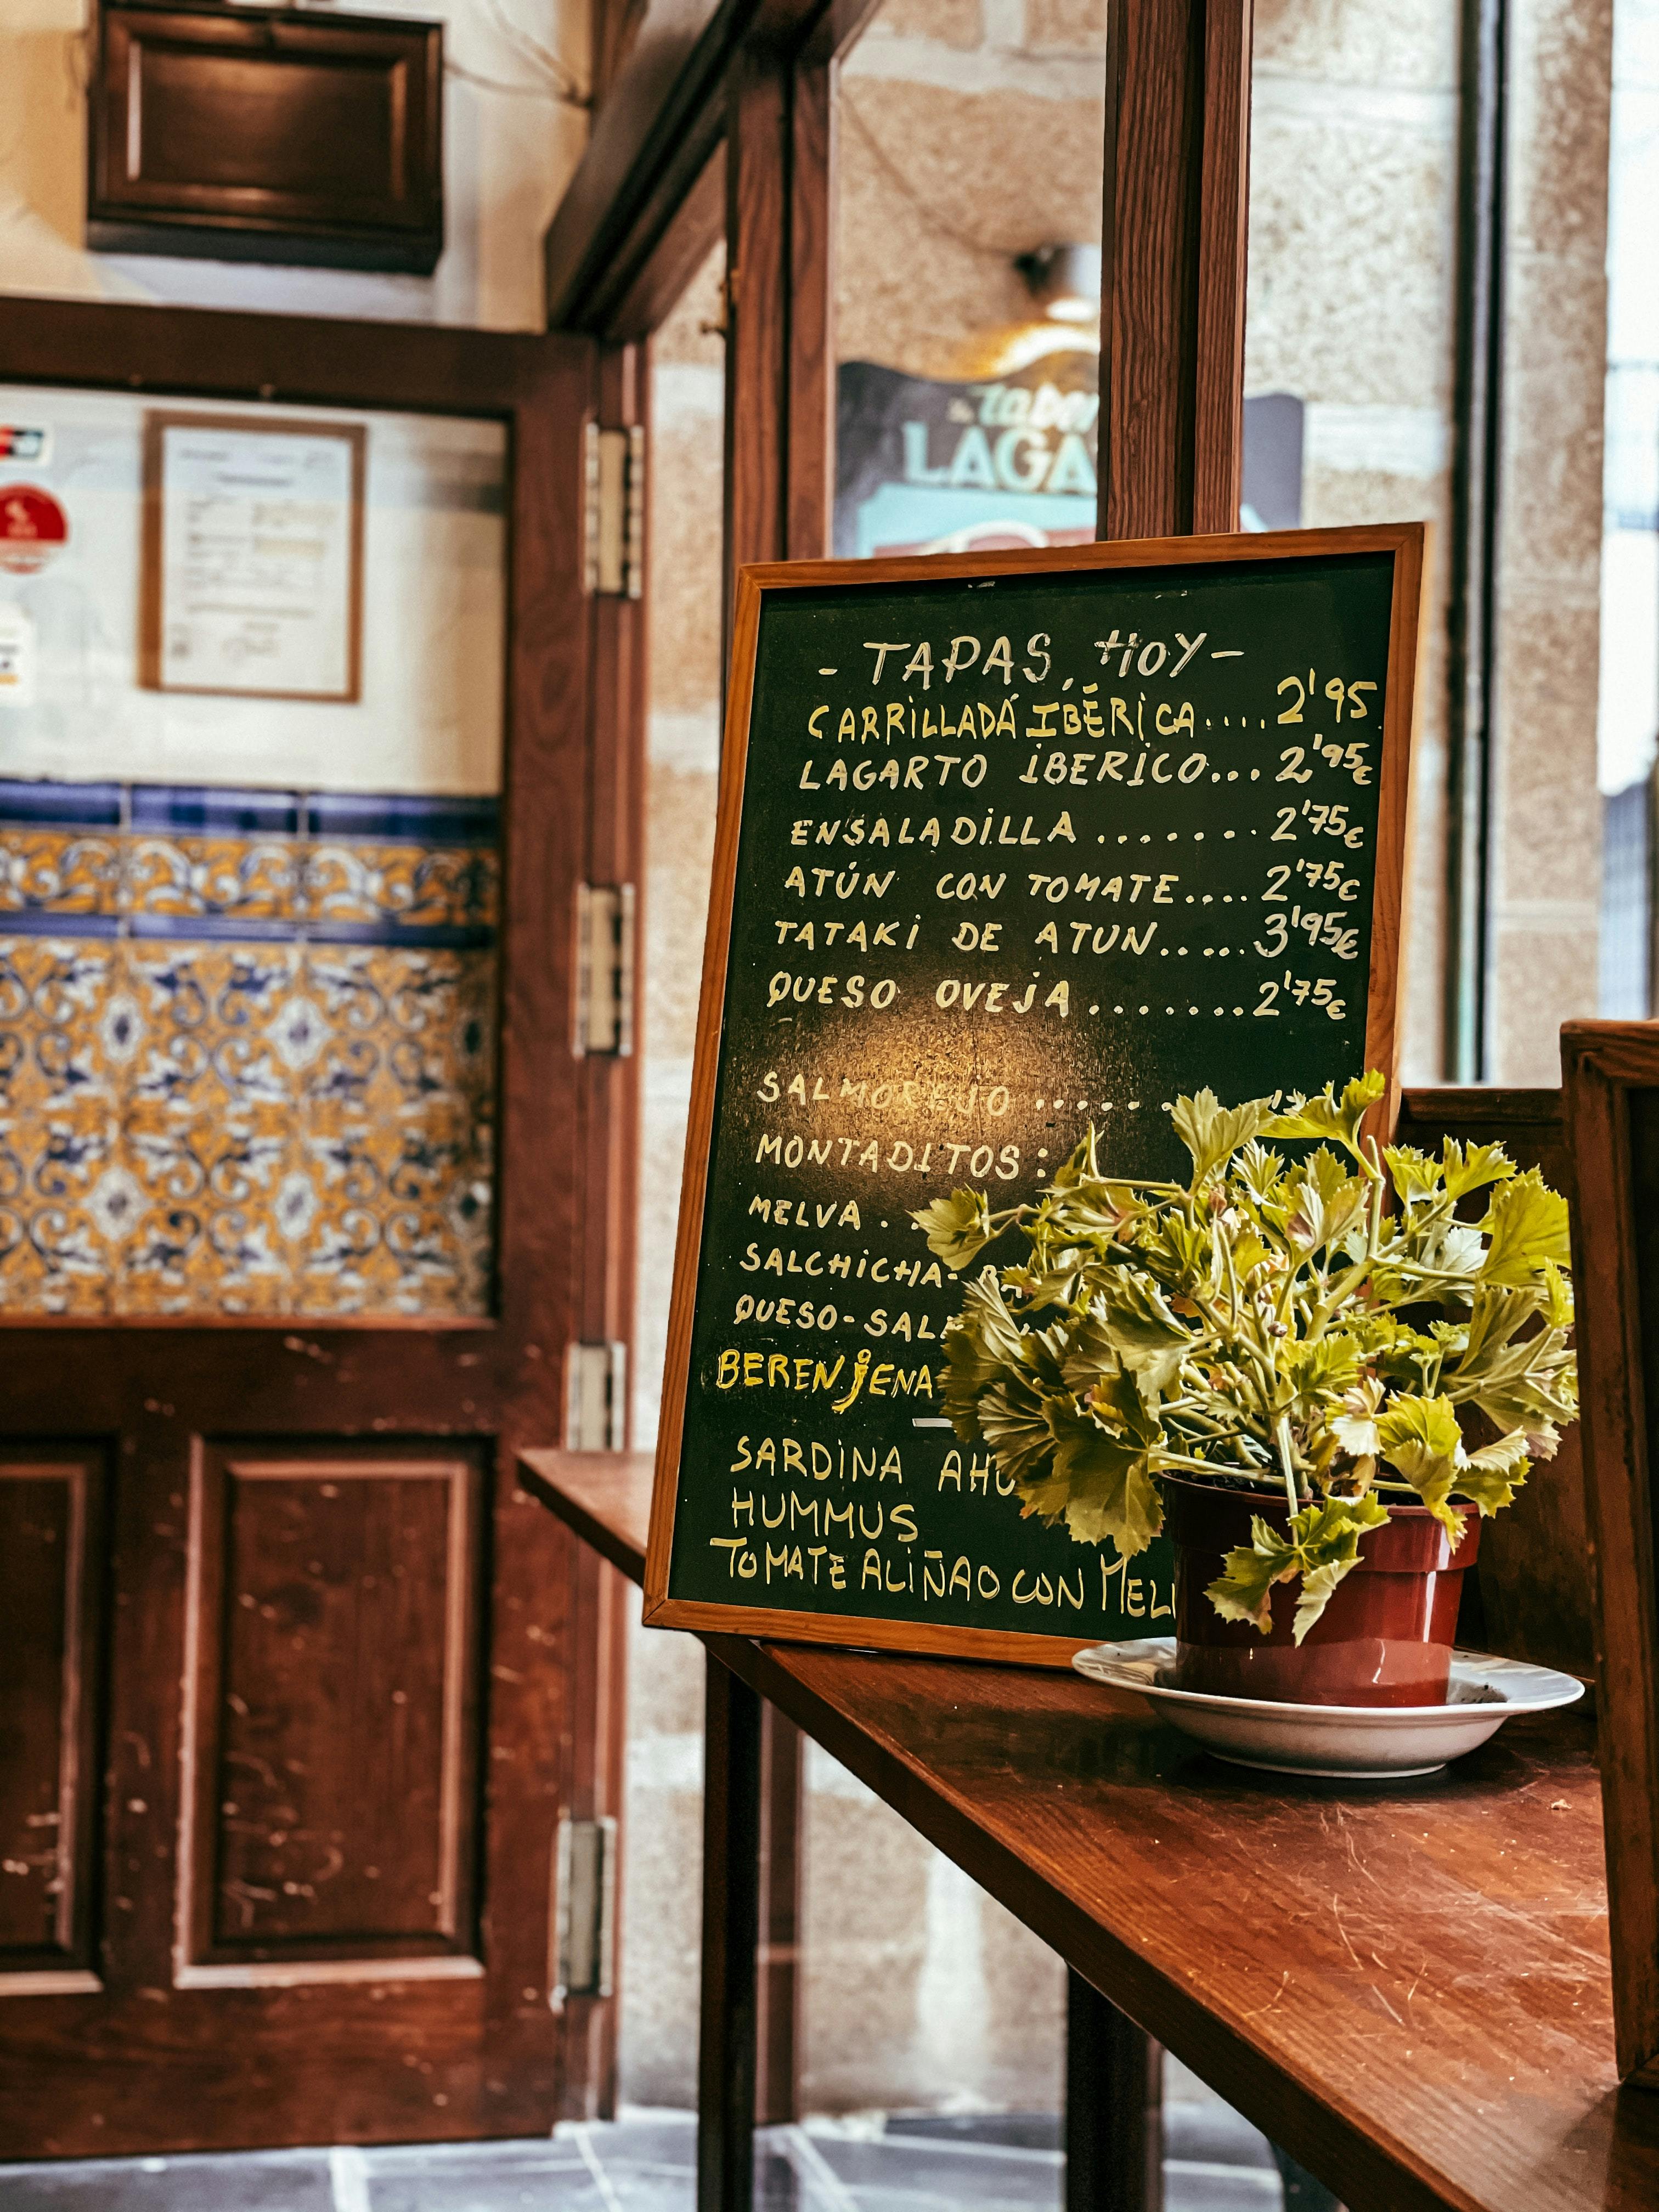 Wine tasting and tapas in Seville